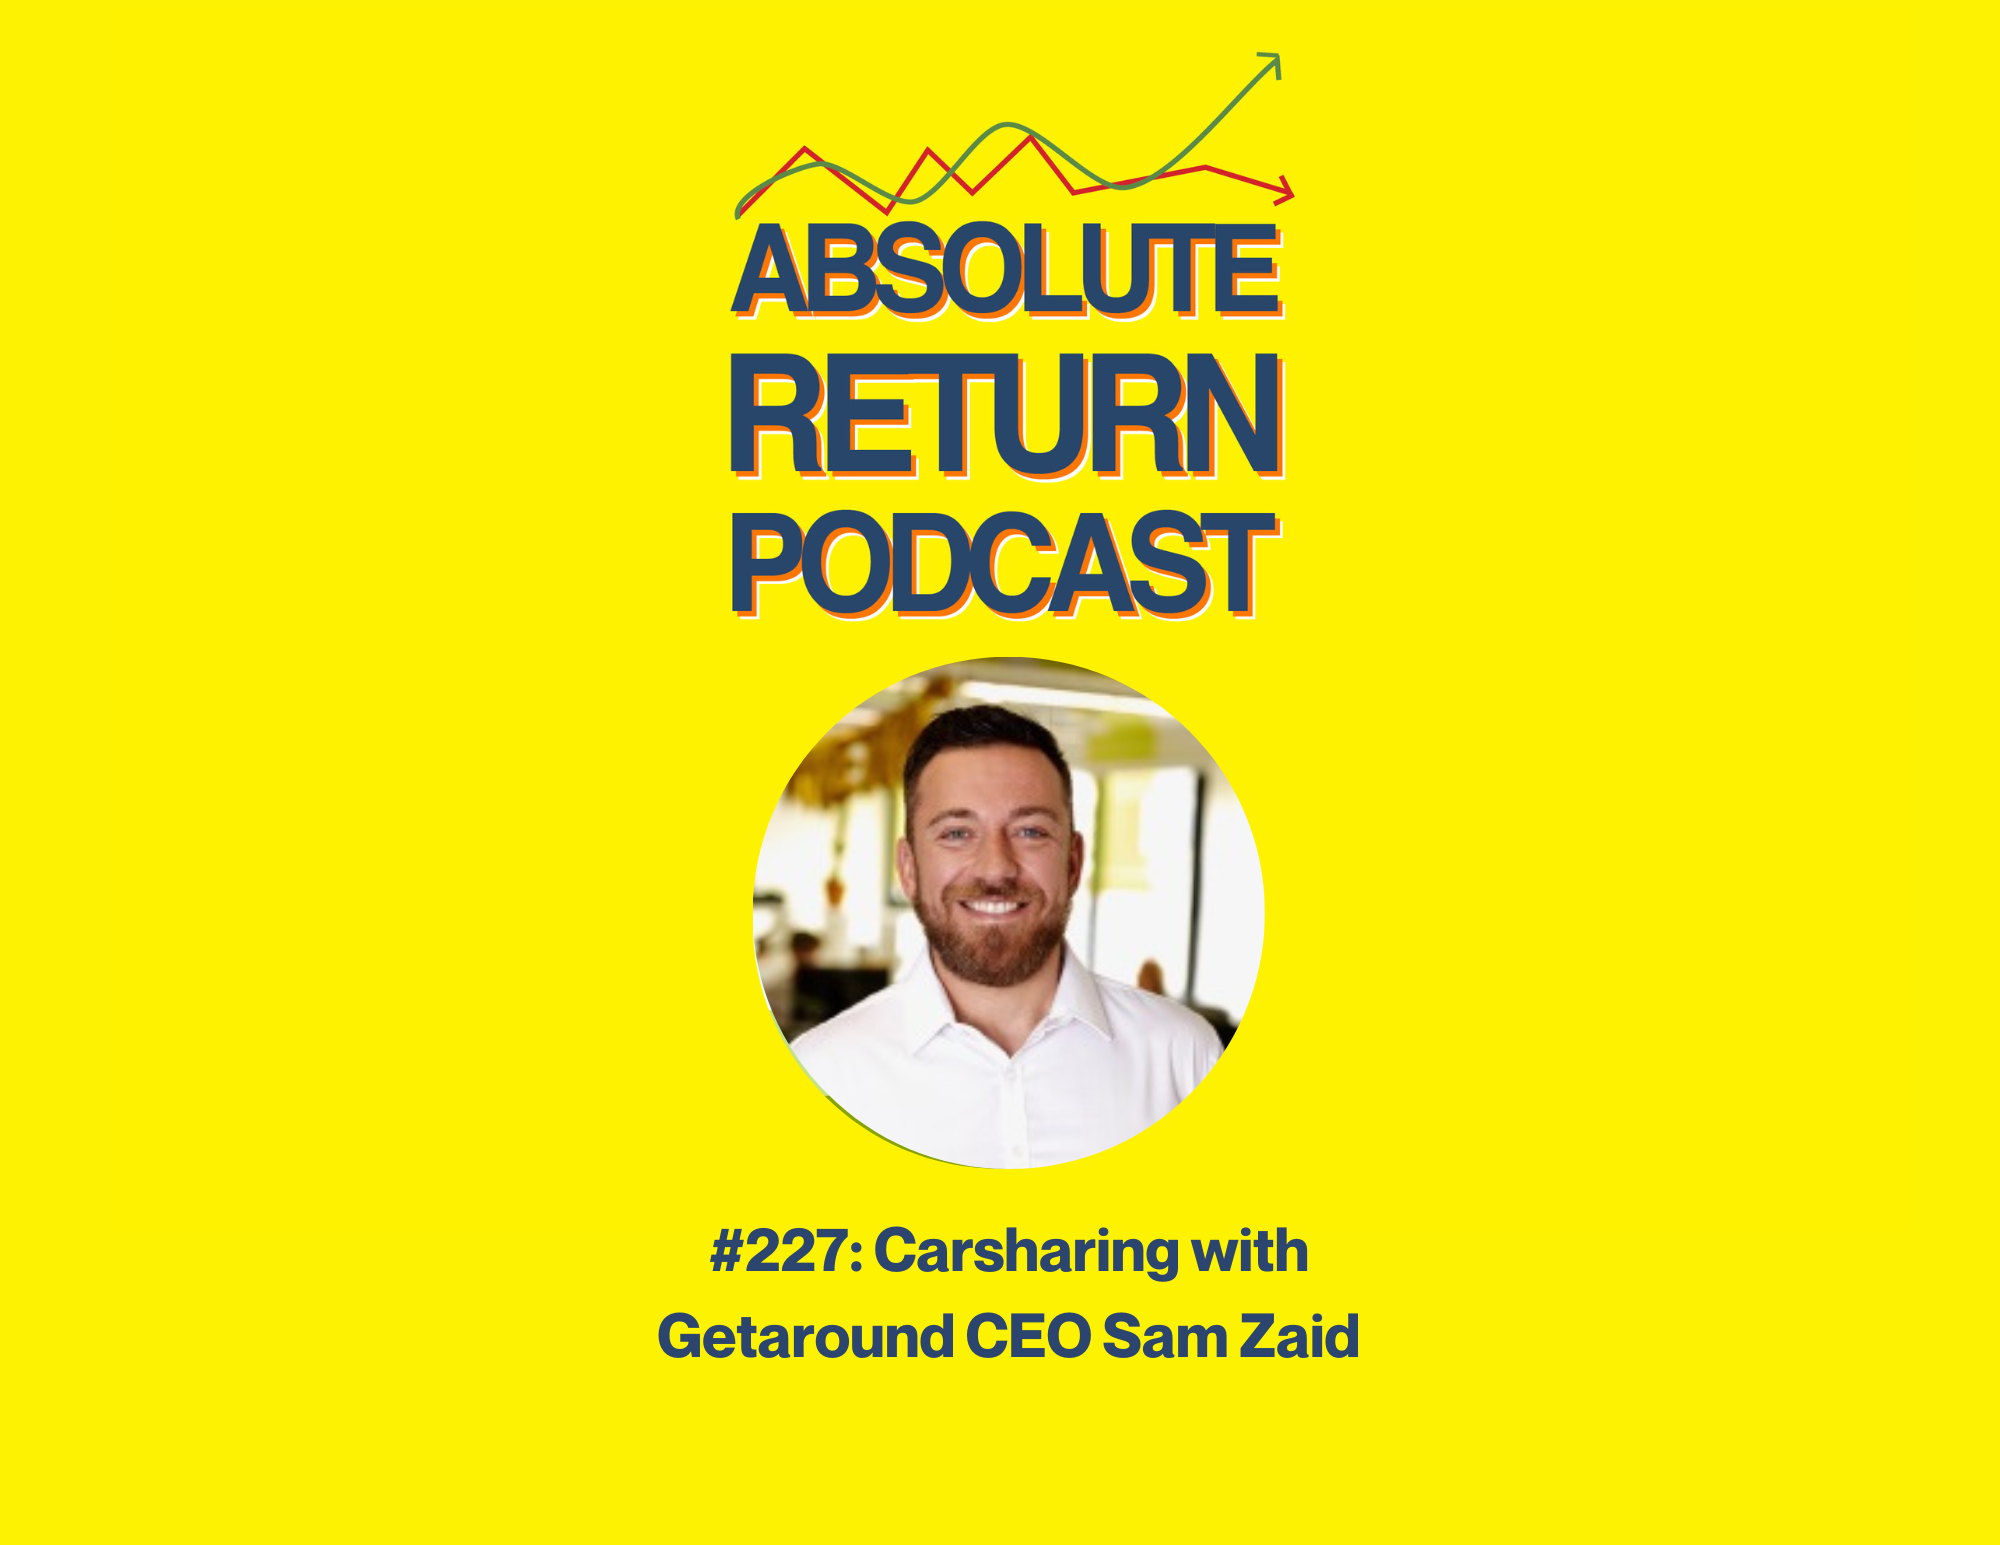 Absolute Return Podcast #227: Carsharing with Getaround CEO Sam Zaid